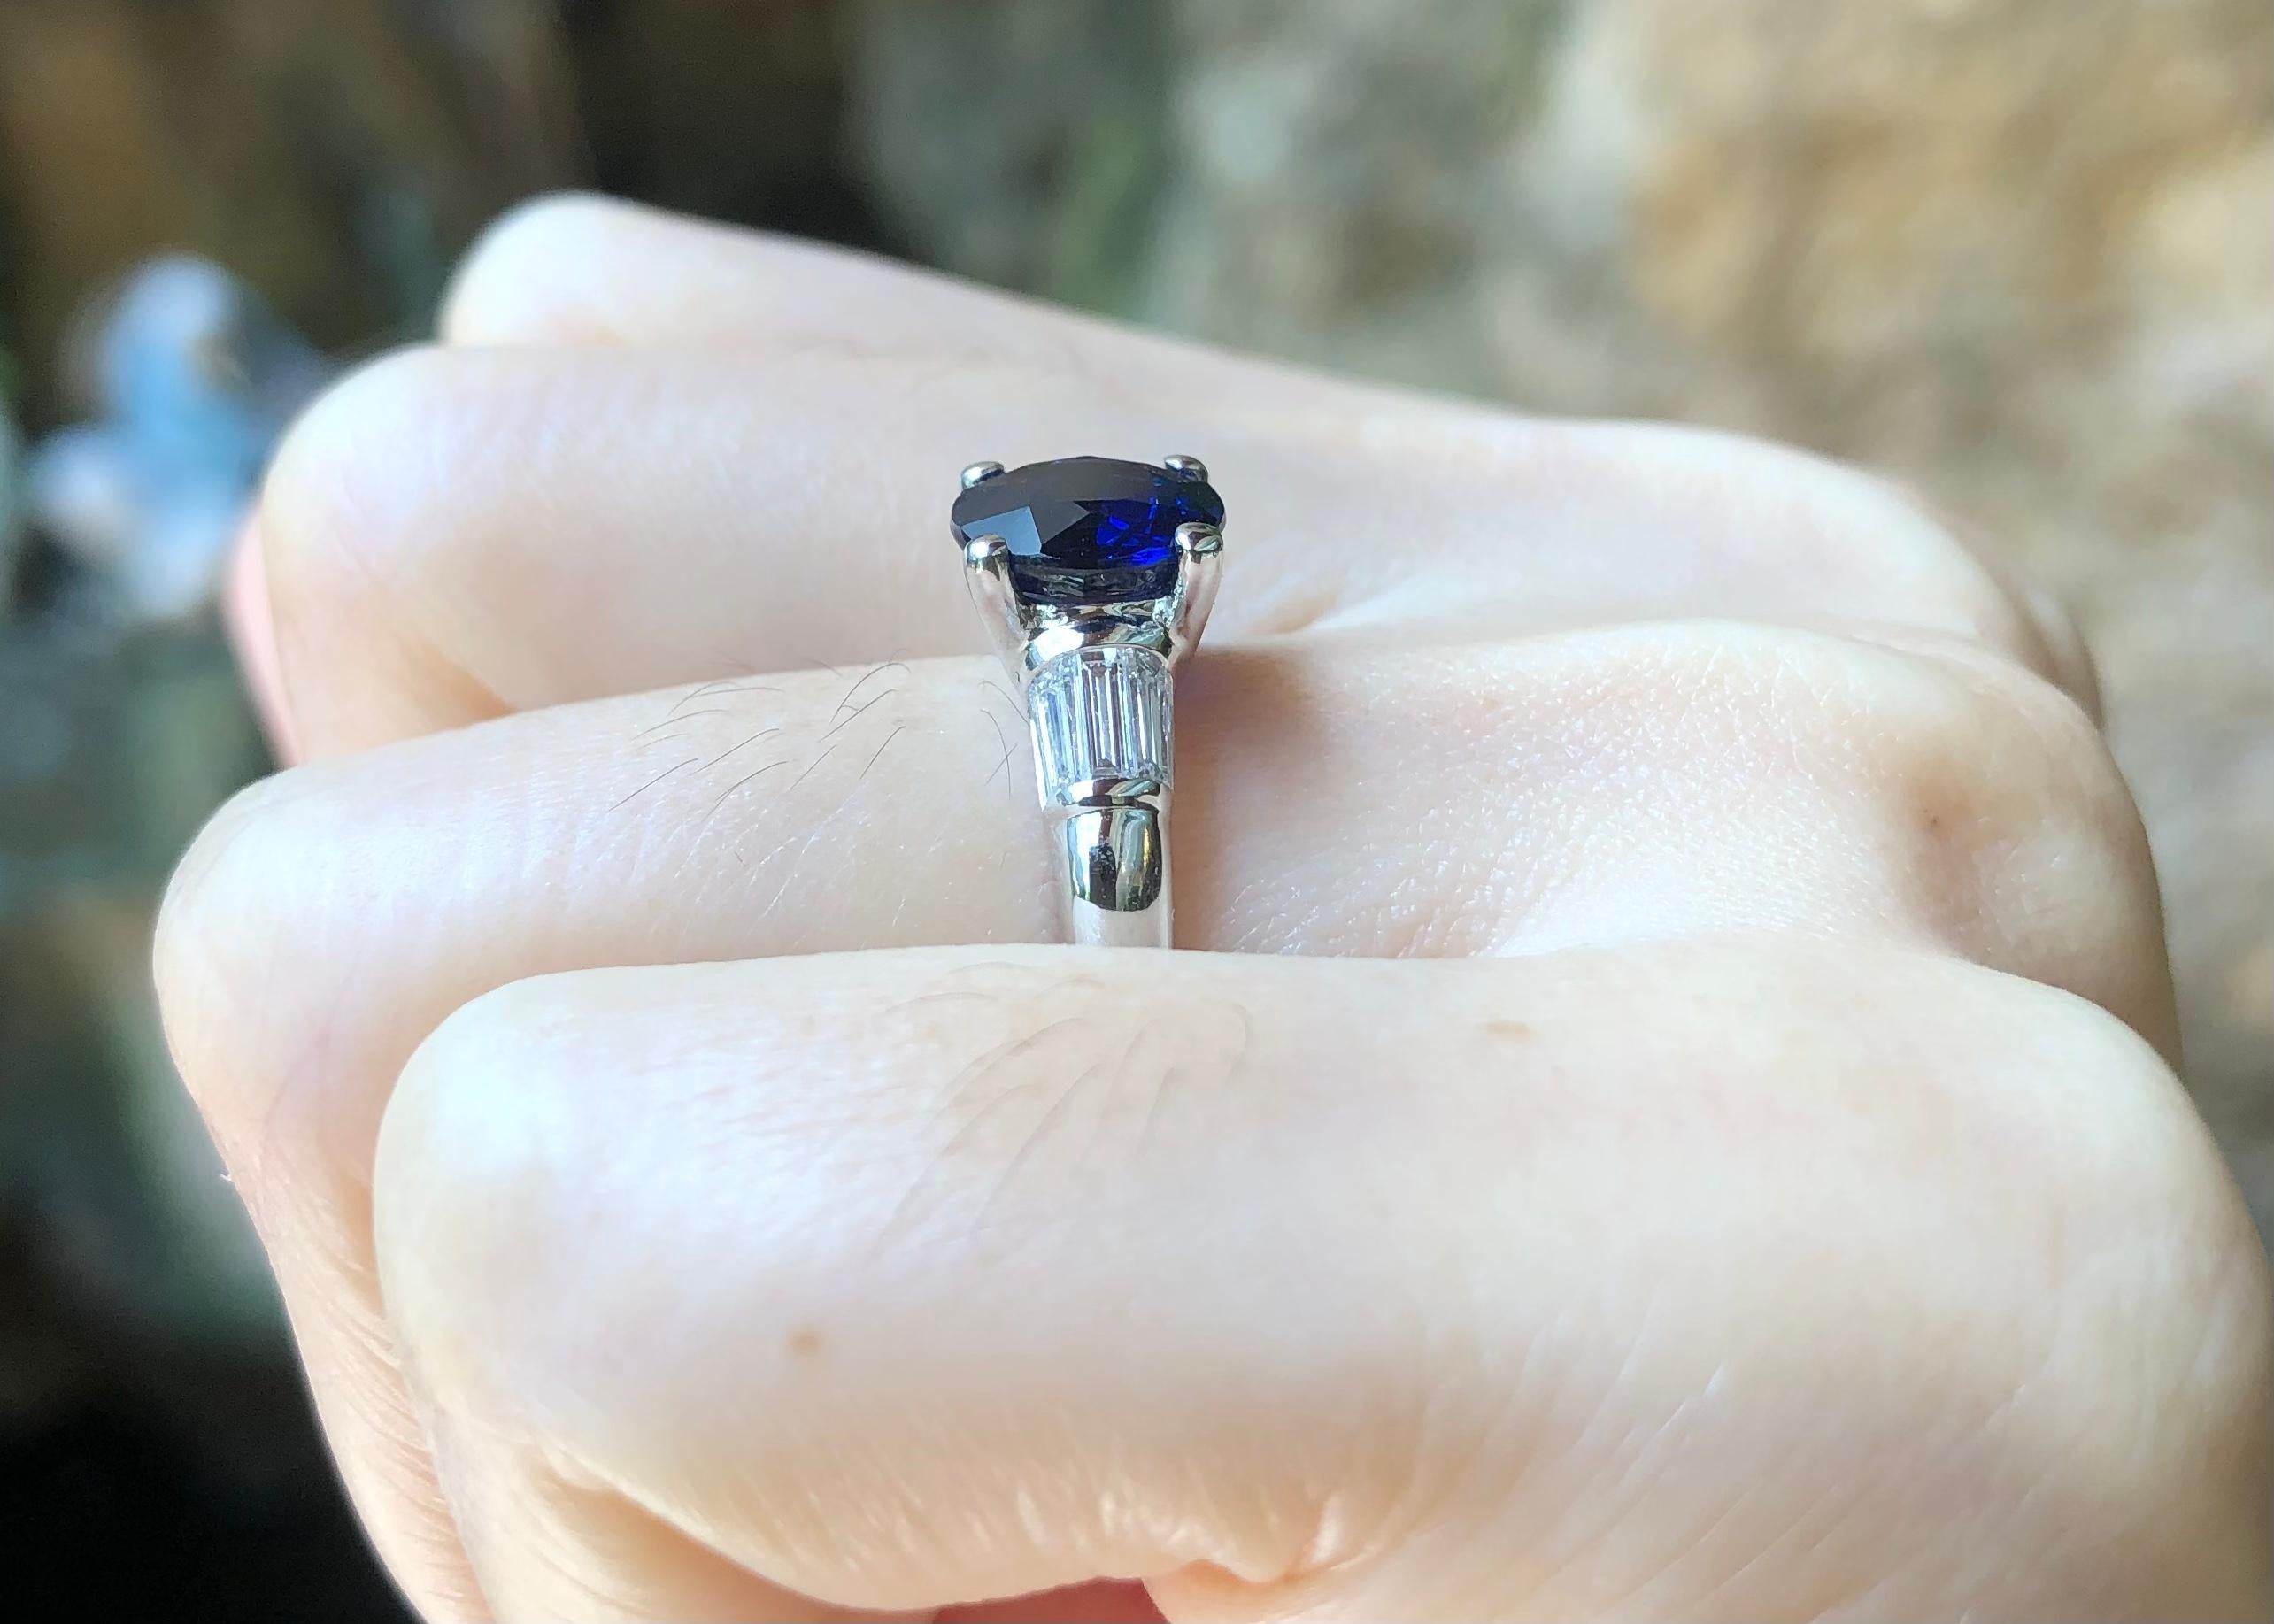 Blue Sapphire 2.09 carats with Diamond 0.50 carat Ring set in 18 Karat White Gold Settings

Width:  0.8 cm 
Length: 0.8 cm
Ring Size: 49
Total Weight: 3.92 grams



